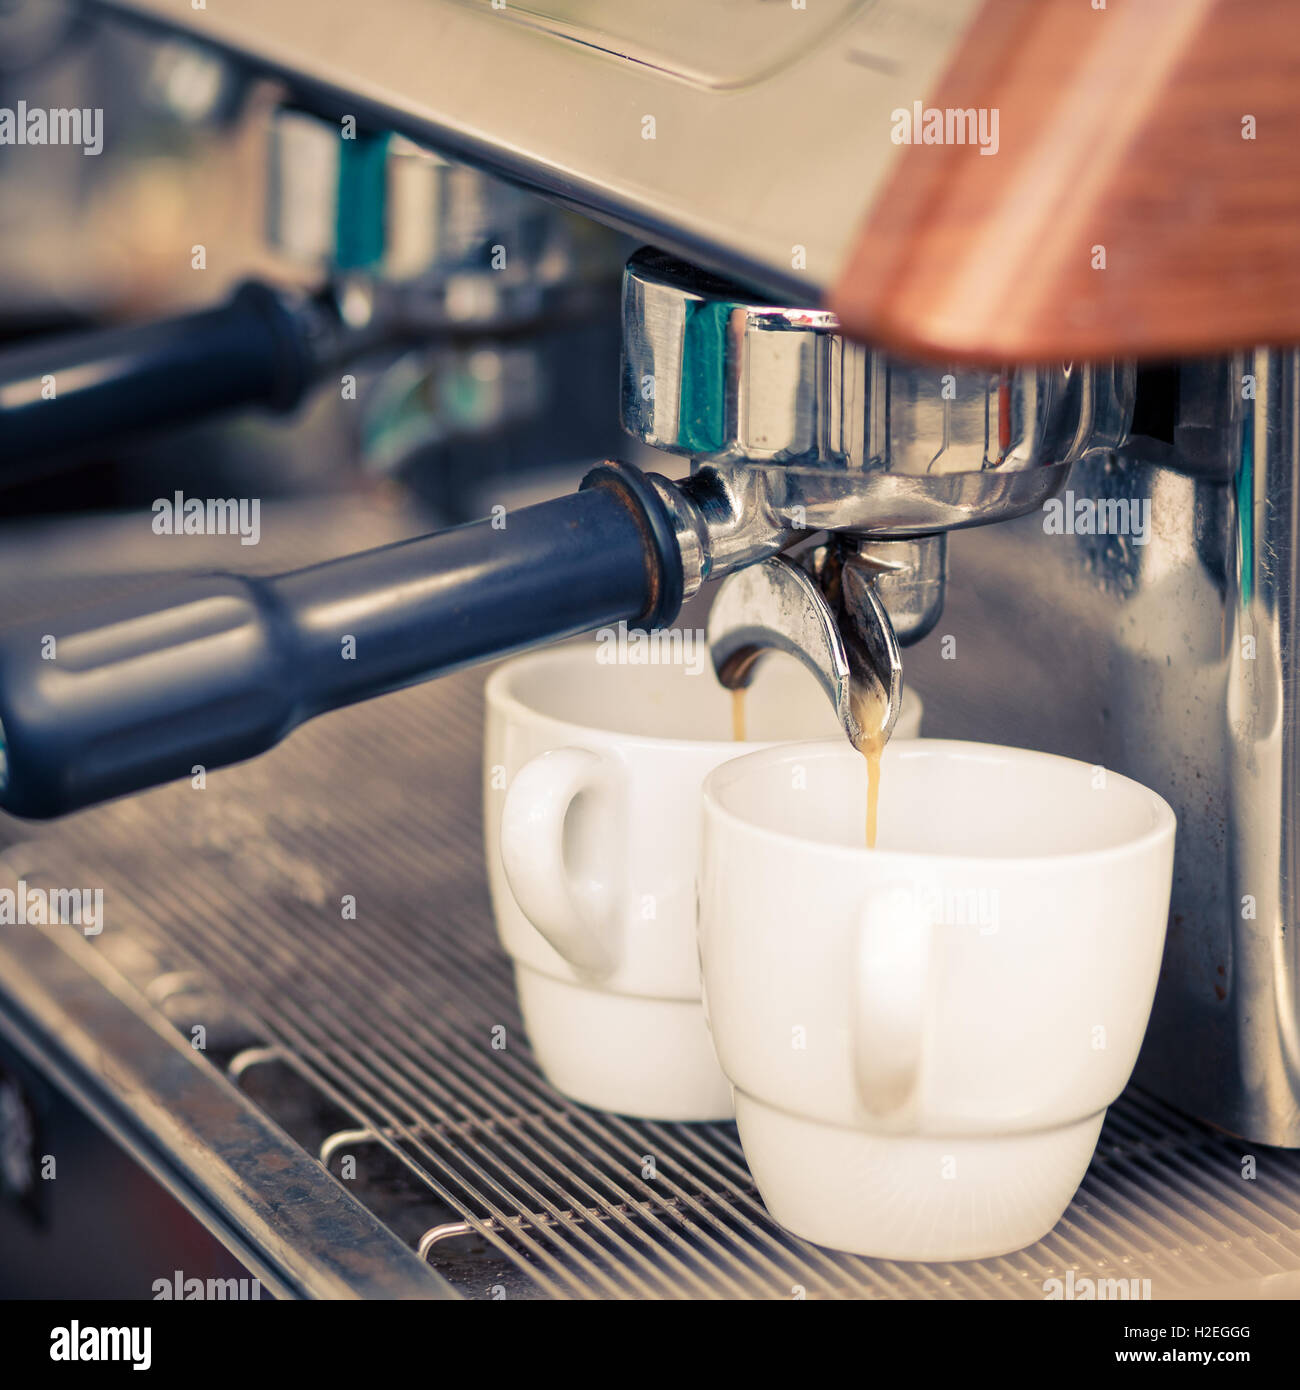 https://c8.alamy.com/comp/H2EGGG/brewing-two-cups-of-espresso-in-professional-coffee-machine-H2EGGG.jpg